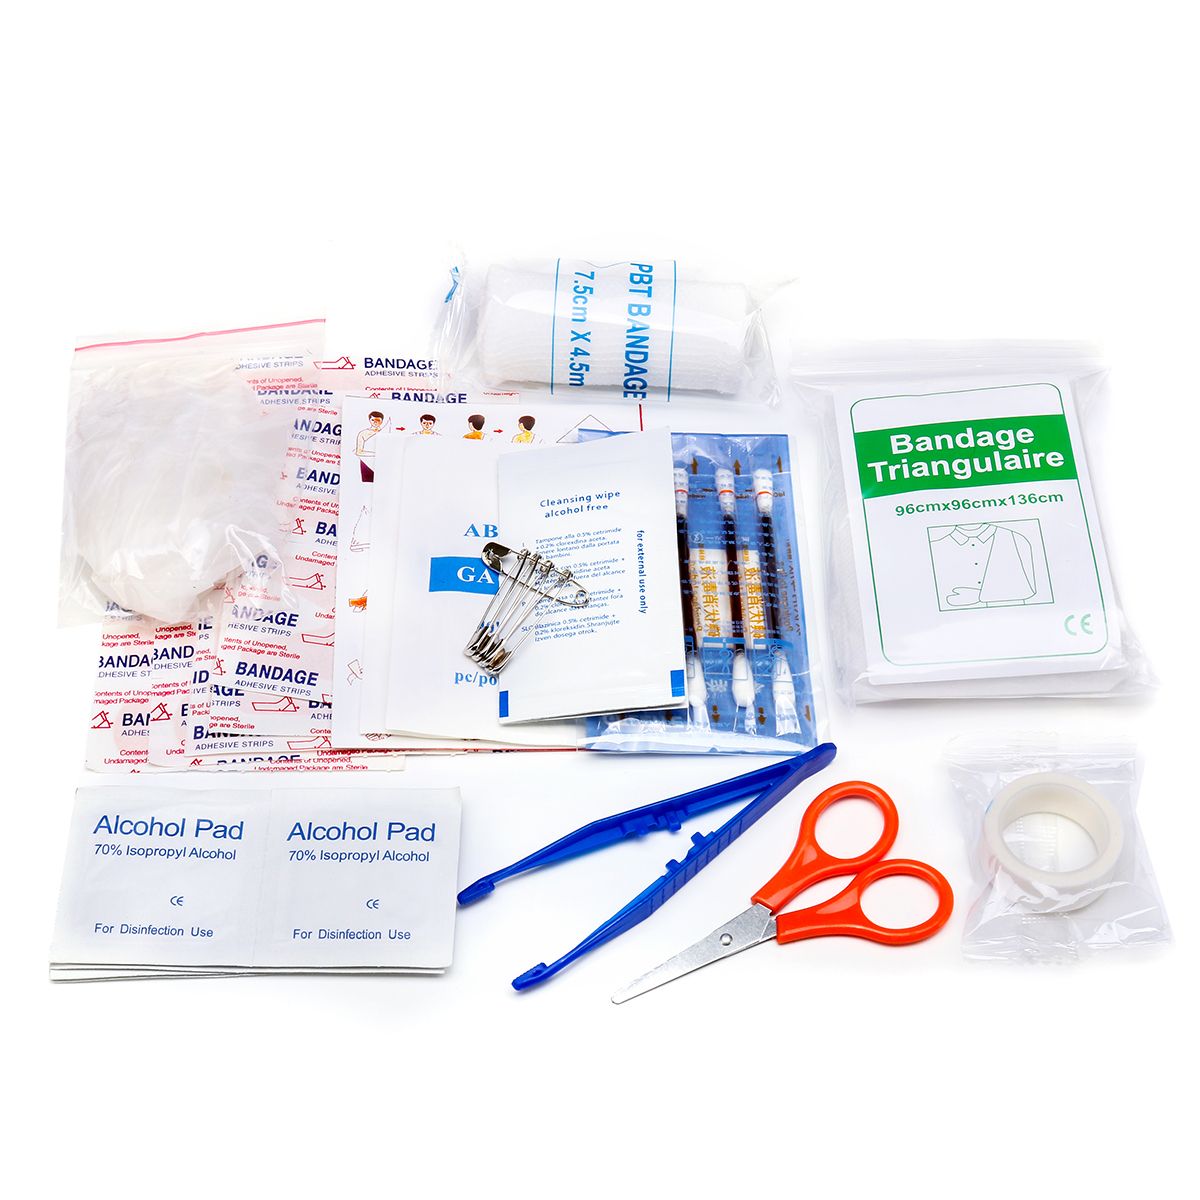 46Pcs-IN-1-SOS-Emergency-Survival-Kit-First-Aid-Kit-For-Home-Office-Camping-1440023